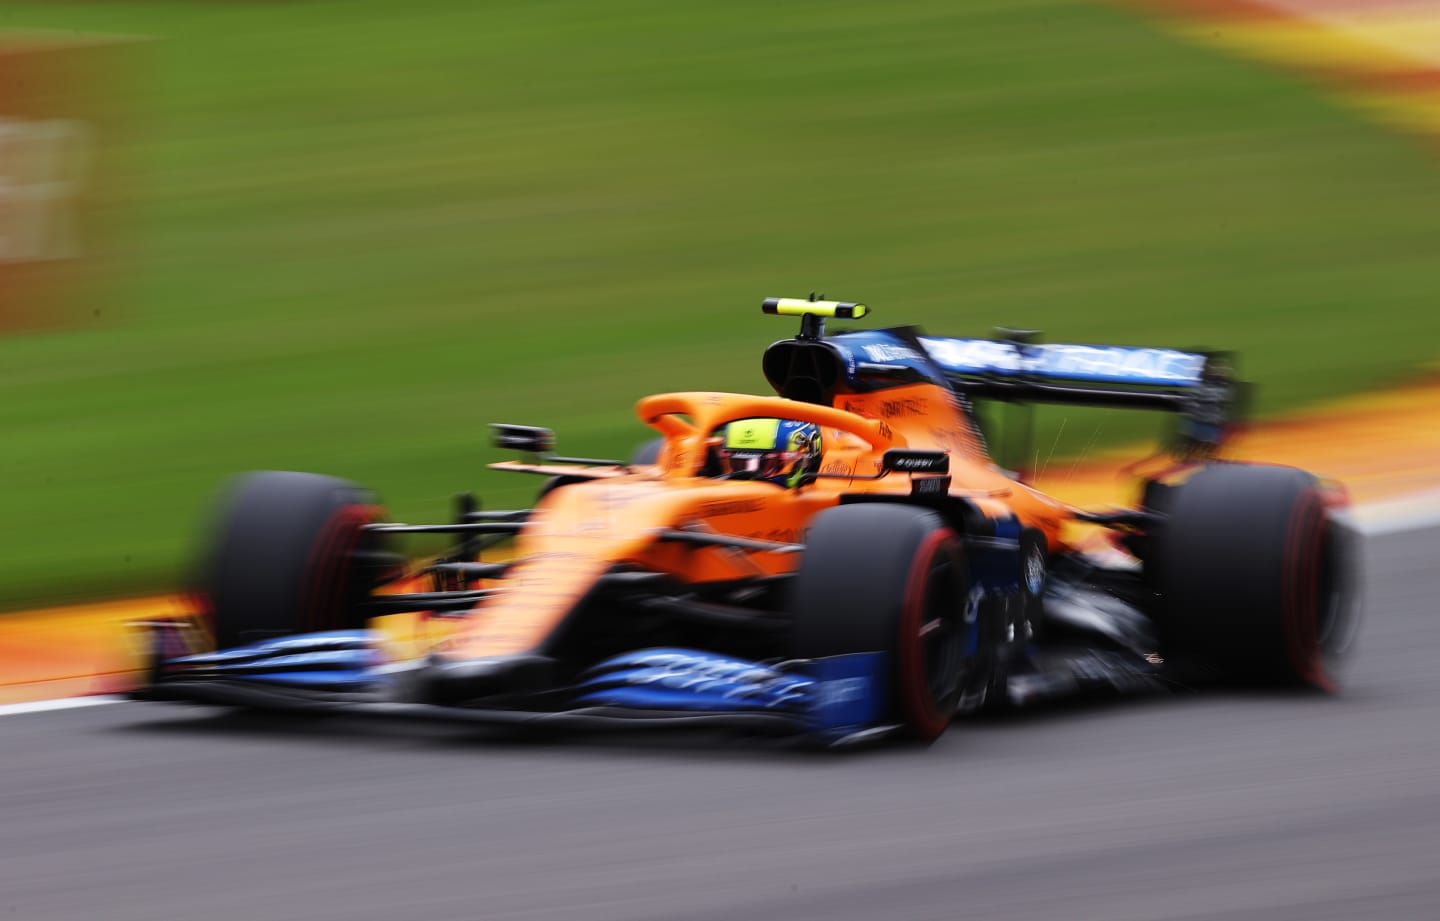 SPA, BELGIUM - AUGUST 29: Lando Norris of Great Britain driving the (4) McLaren F1 Team MCL35 Renault on track during qualifying for the F1 Grand Prix of Belgium at Circuit de Spa-Francorchamps on August 29, 2020 in Spa, Belgium. (Photo by Lars Baron/Getty Images)